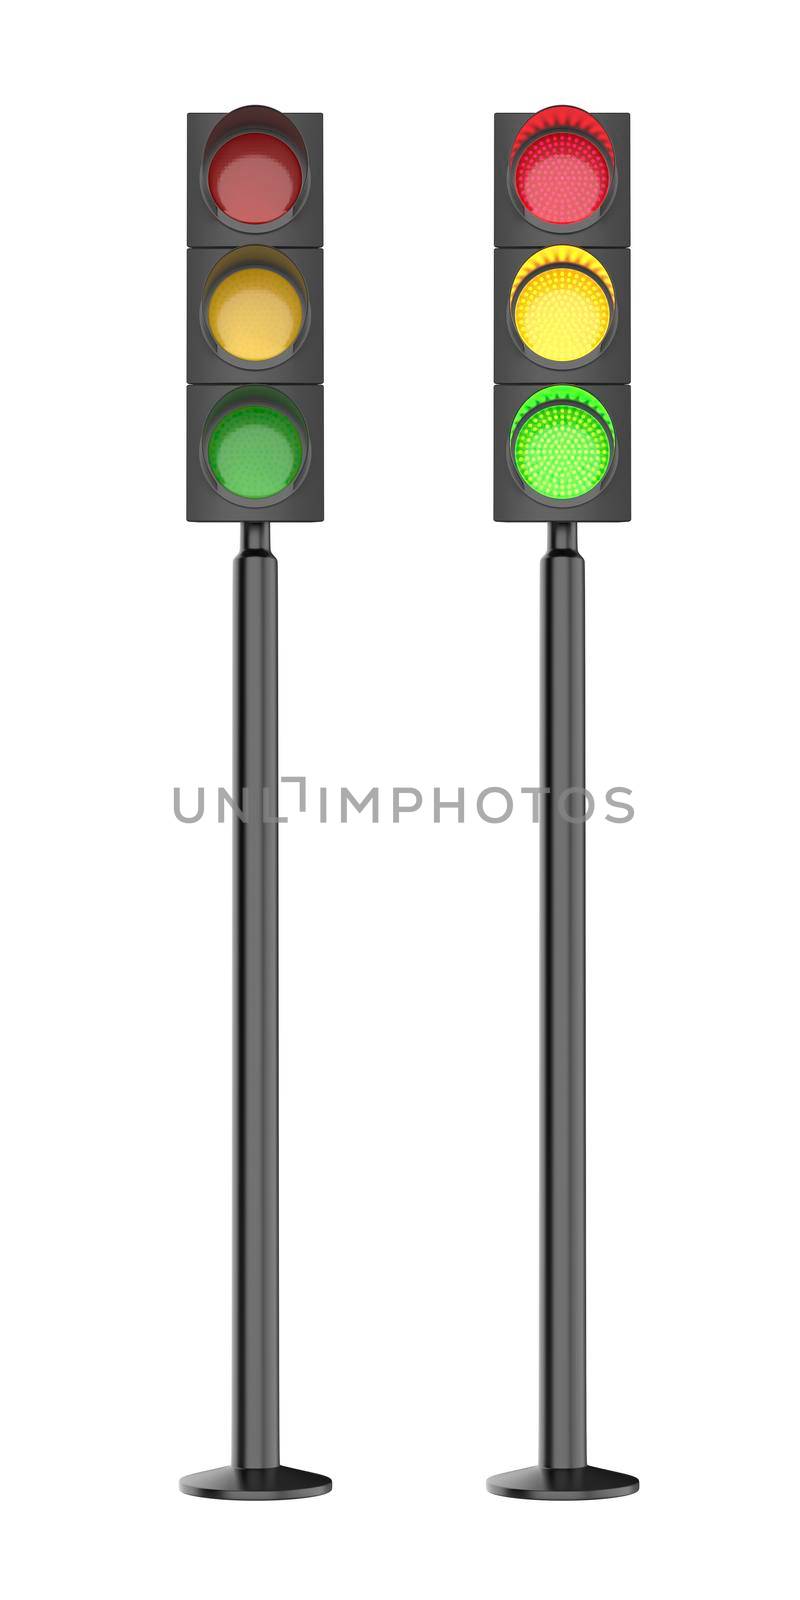 Traffic lights isolated on white background, front view